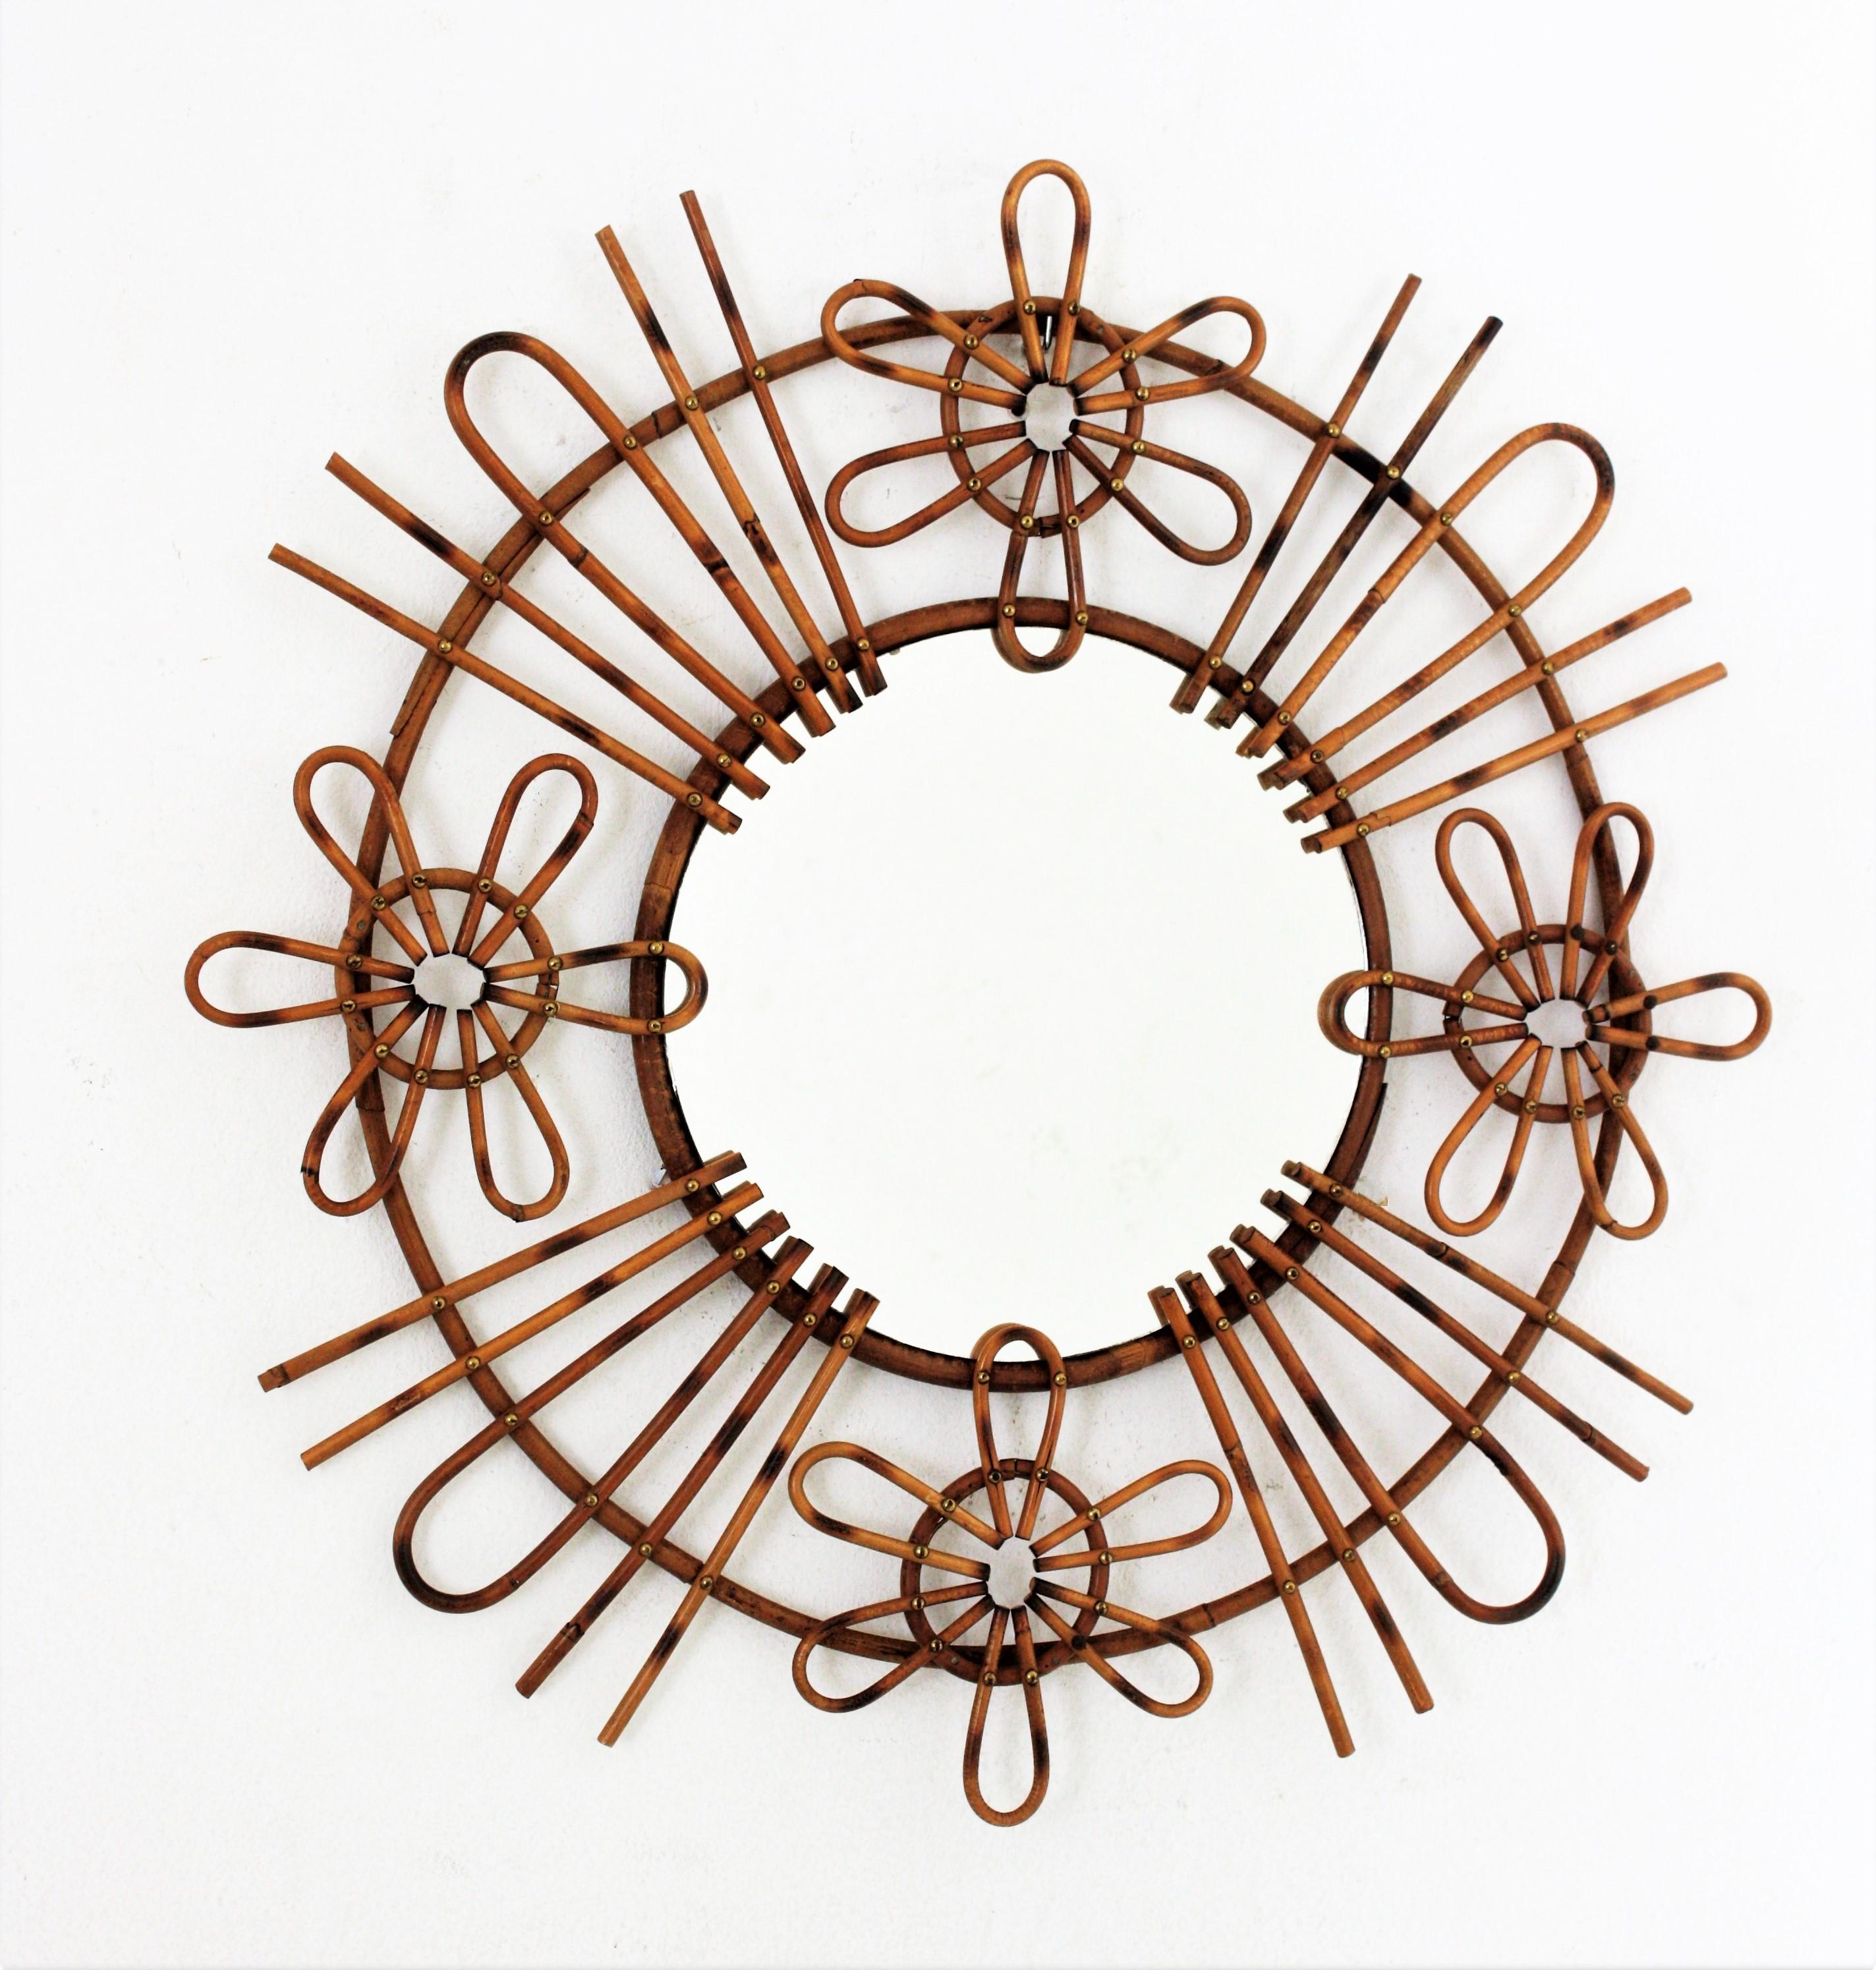 Rattan Spanish Modernist handcrafted sunburst mirror with flower motifs. Spain, 1950s.
Mediterranean style handcrafted sunburst rattan mirror adorned by flowers on the frame. Unusual design.
This mirror will be a cool addition to any beach house,